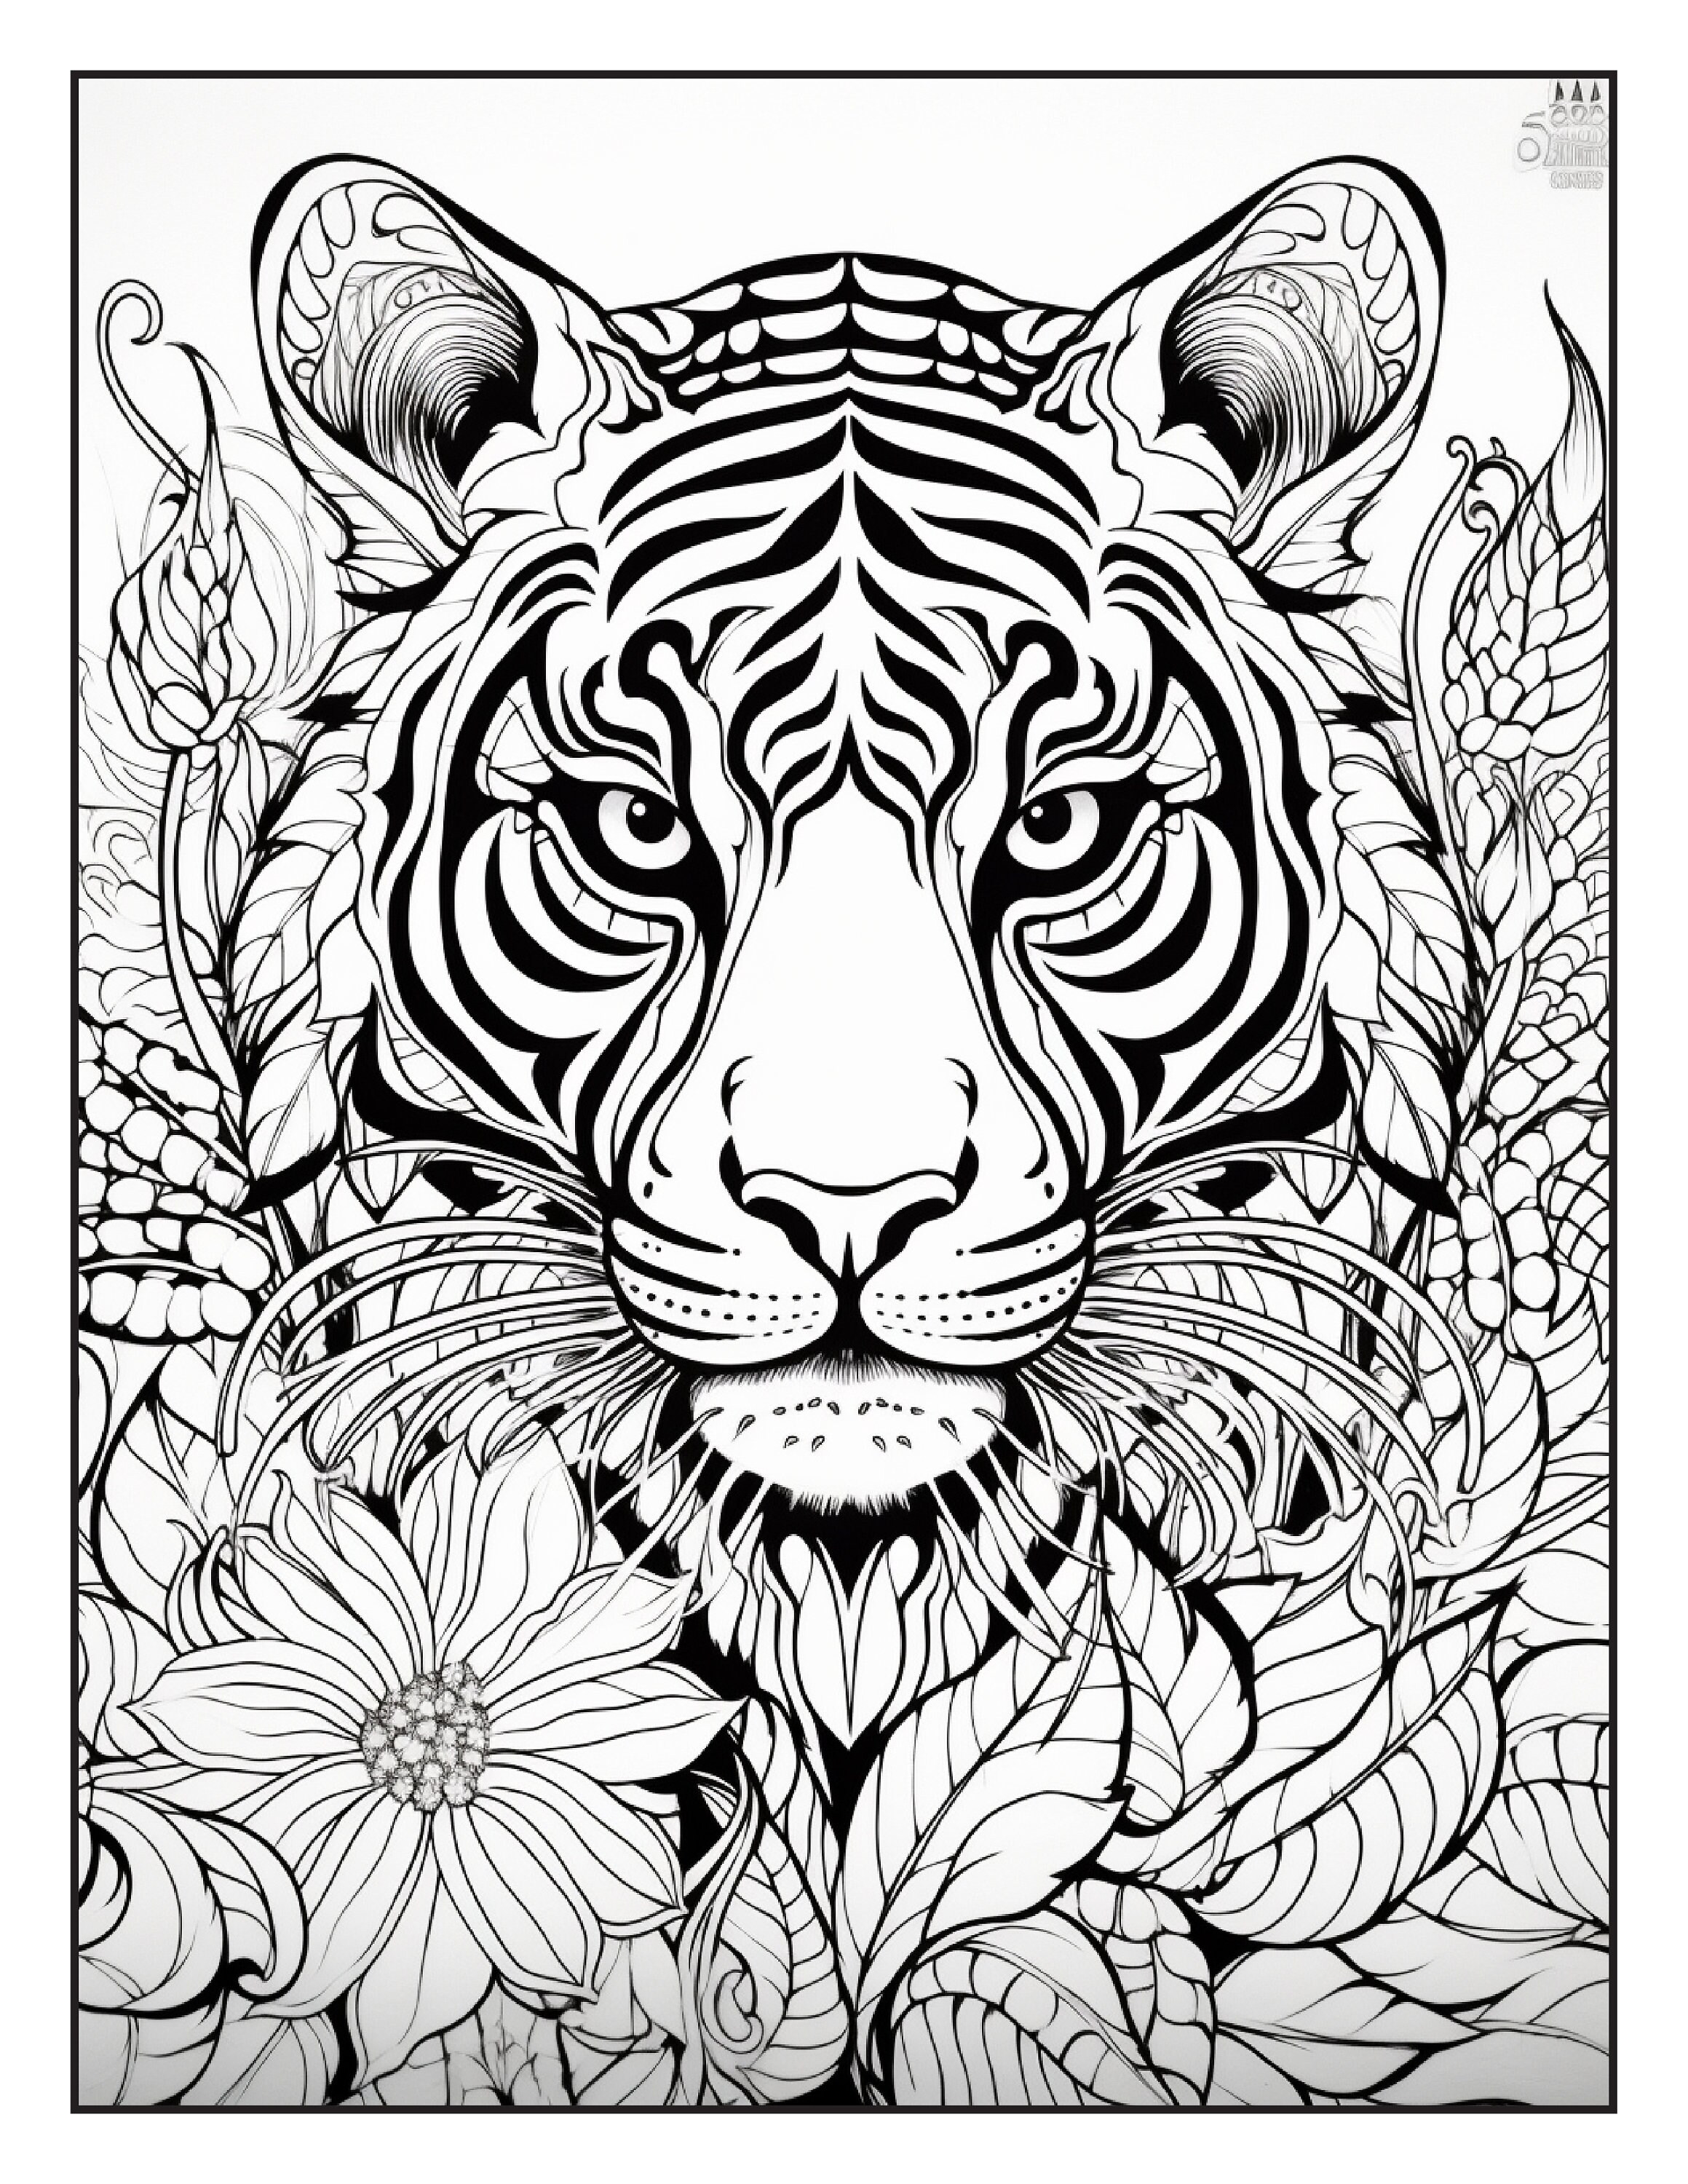 Great Lions adult Coloring Books, Digital Coloring Pages, Coloring